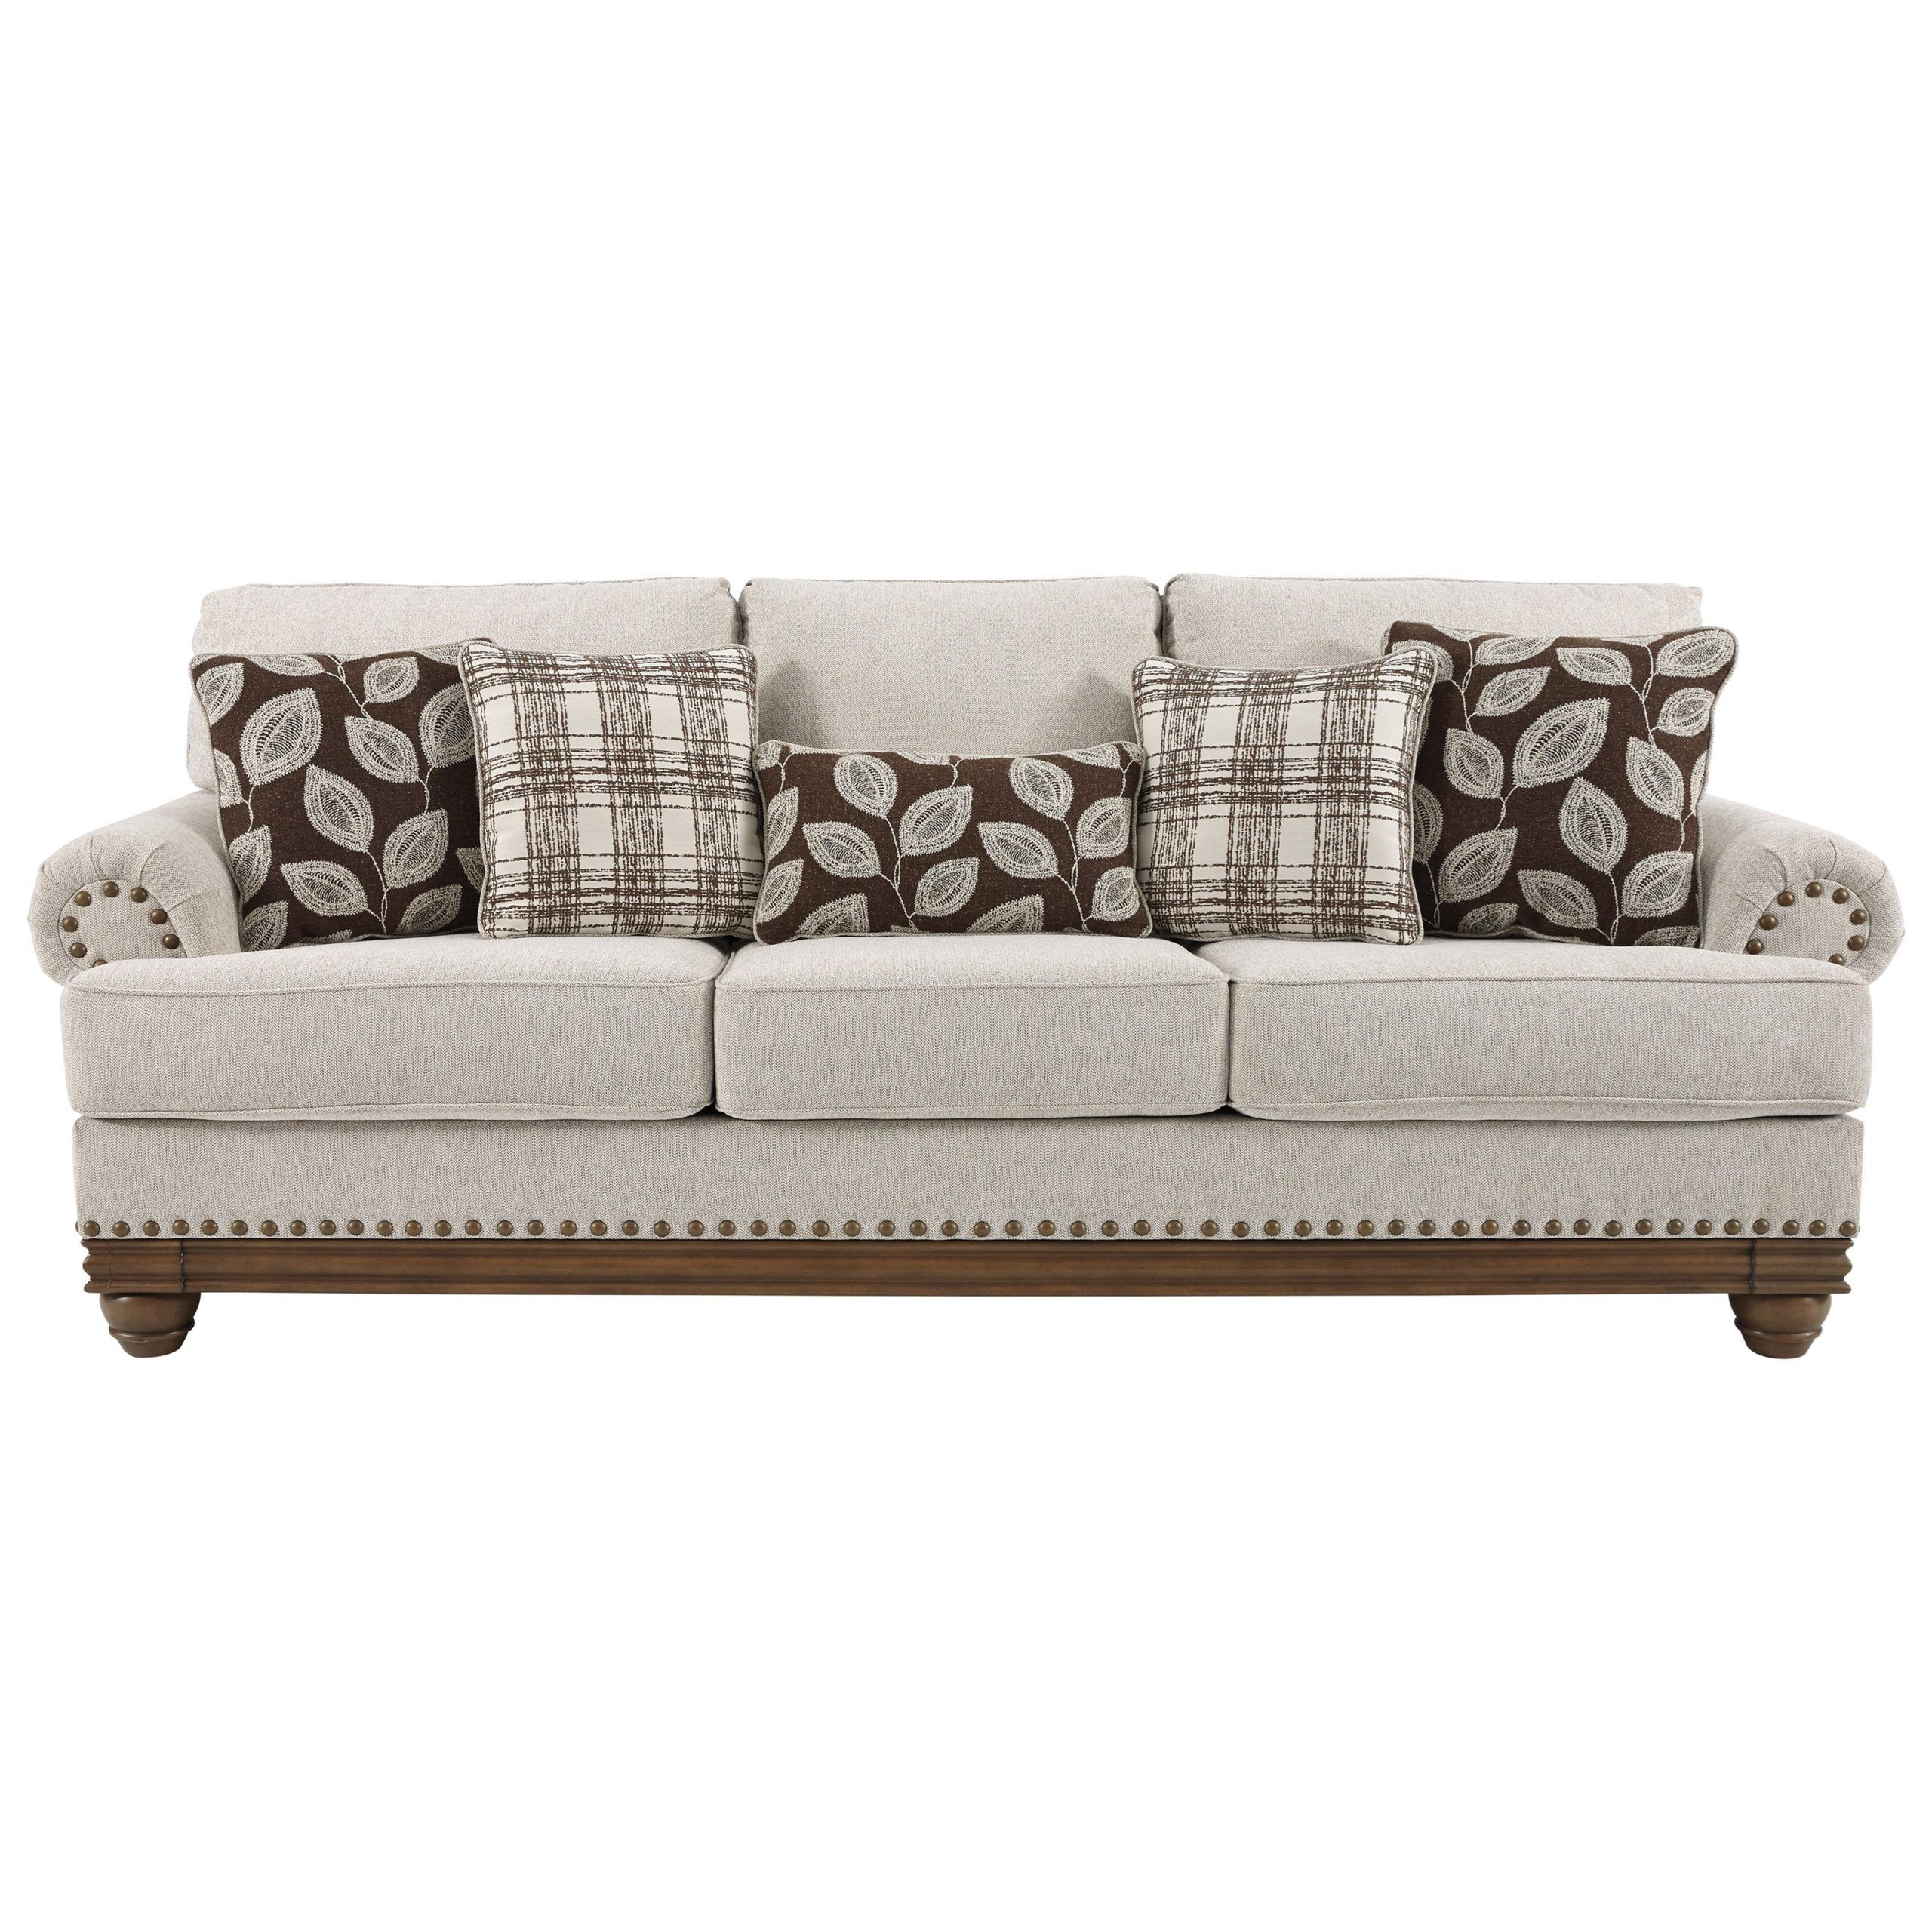 Signature Designashley Harleson 117901 Transitional Sofa With Nailhead  Trim | Factory Direct Furniture | Uph – Stationary Sofas Intended For Sofas With Nailhead Trim (View 3 of 15)